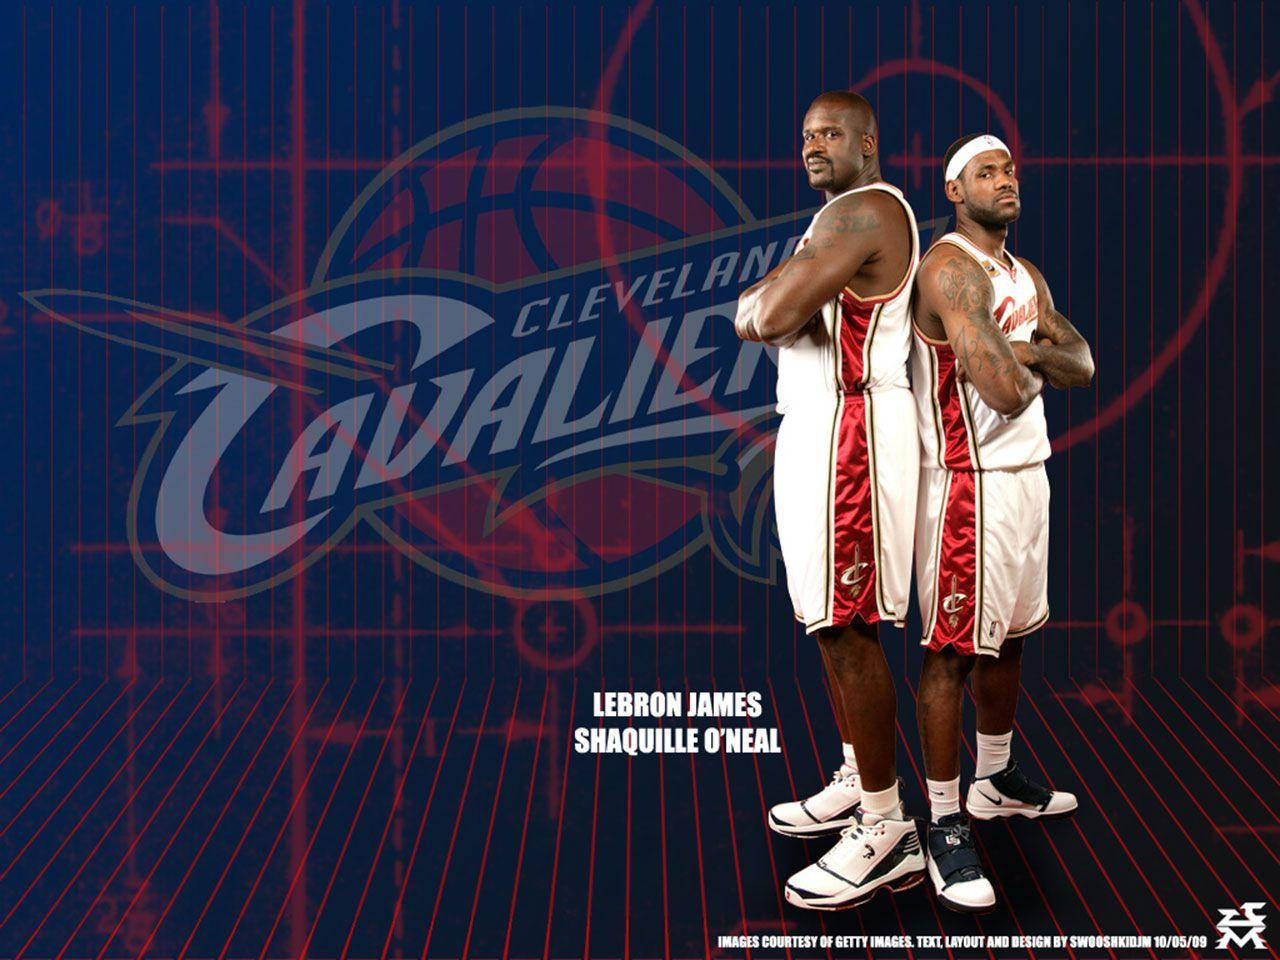 Shaquille O'Neal Cavalier Poster Wallpaper